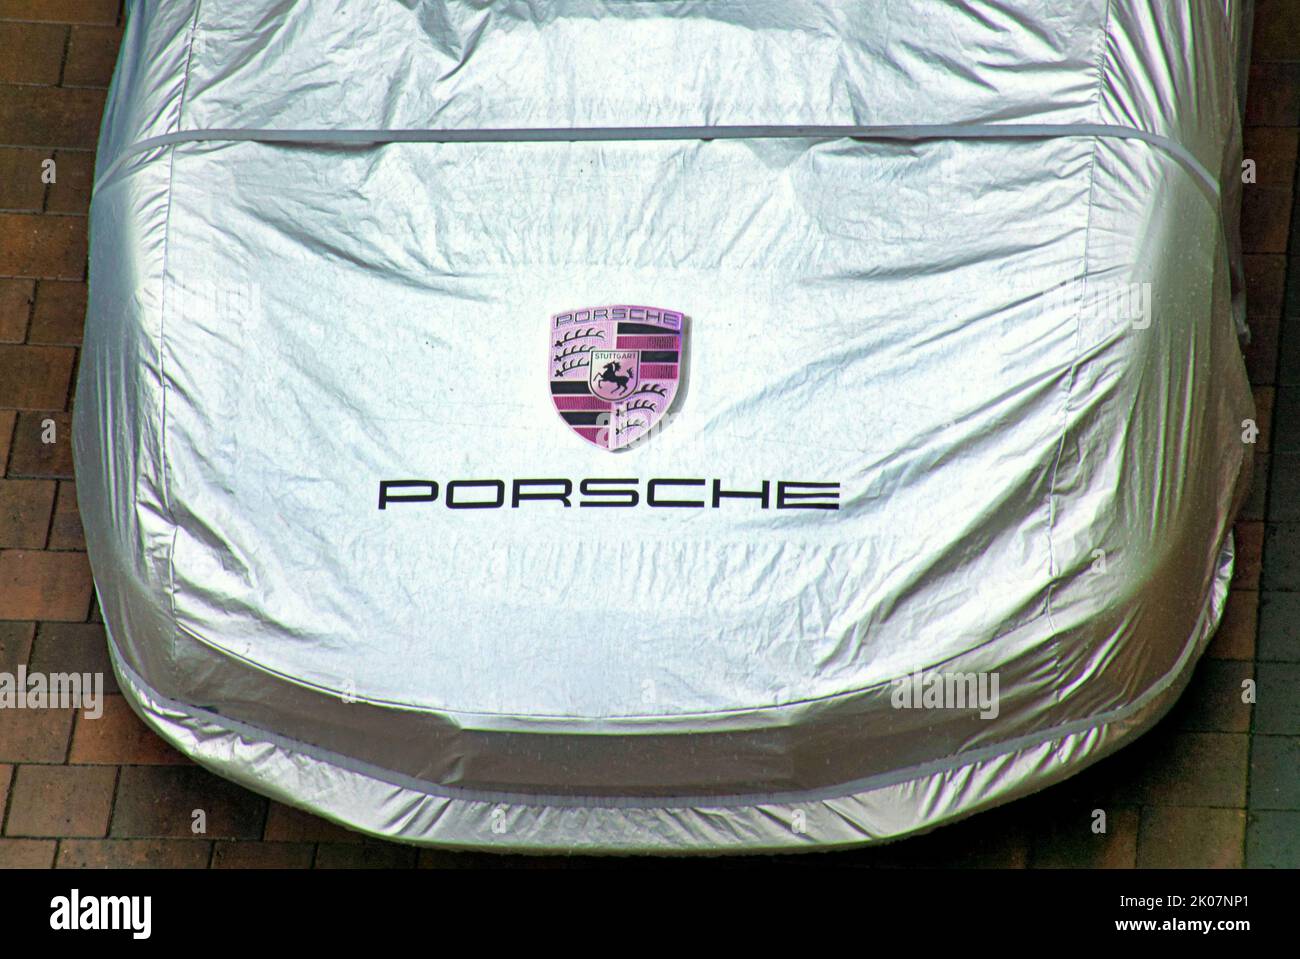 Porsha car under silver  cover with logo on street Stock Photo